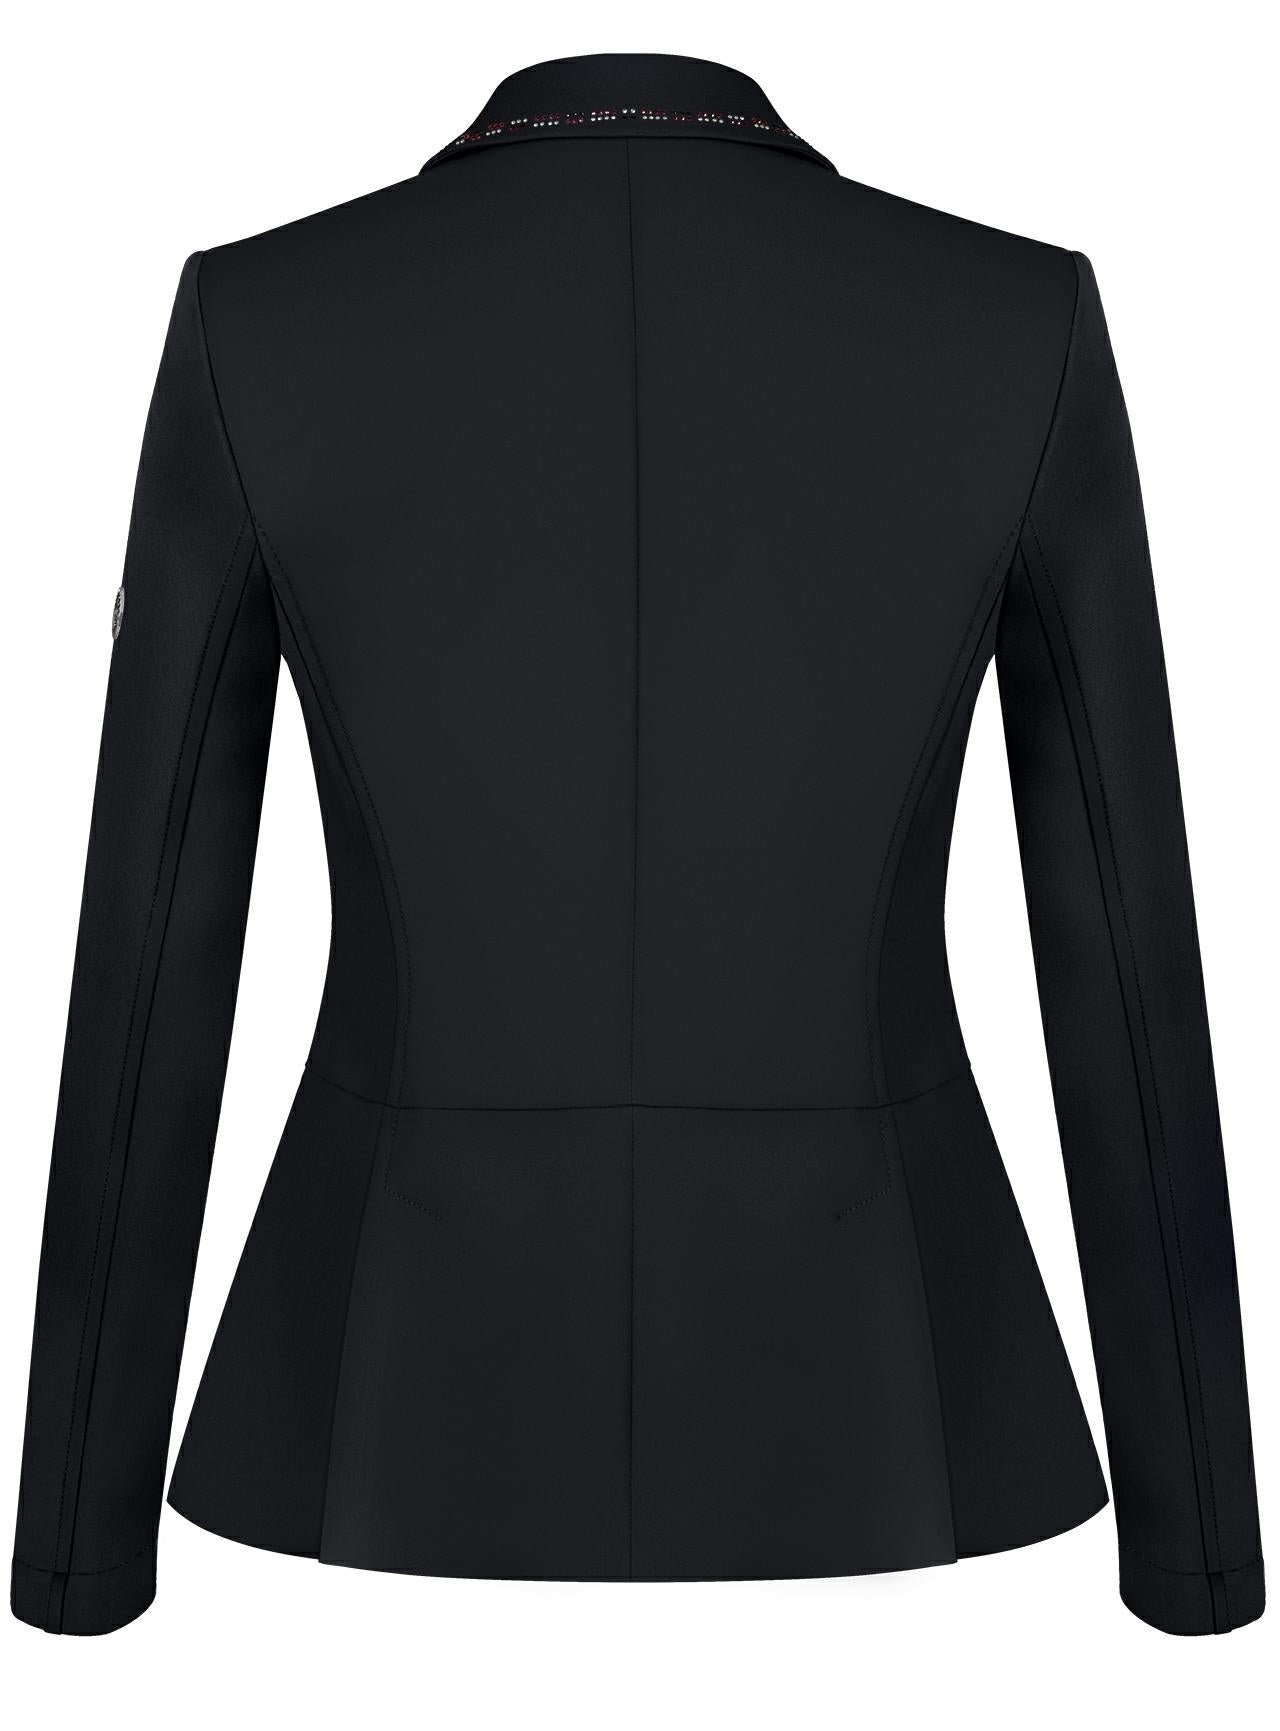 Black show jacket with crystal detailing